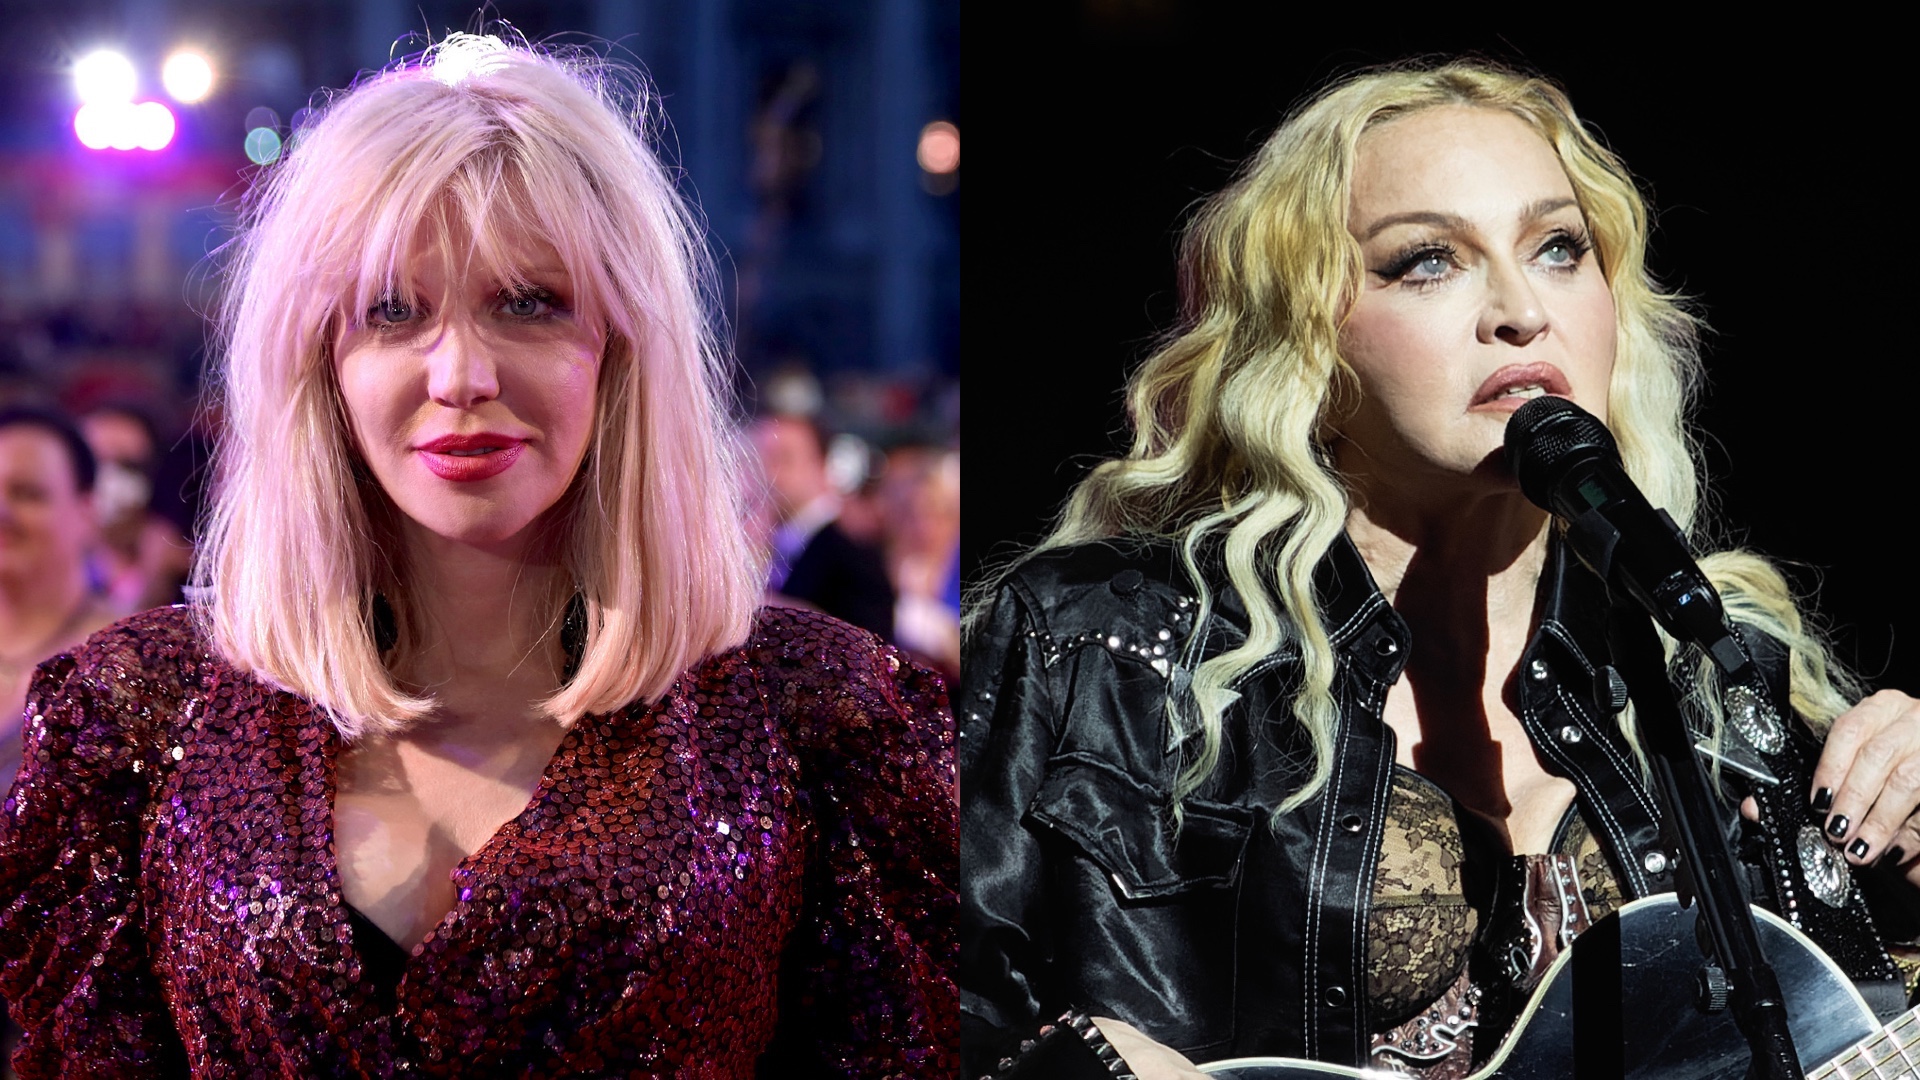 Courtney Love and Madonna